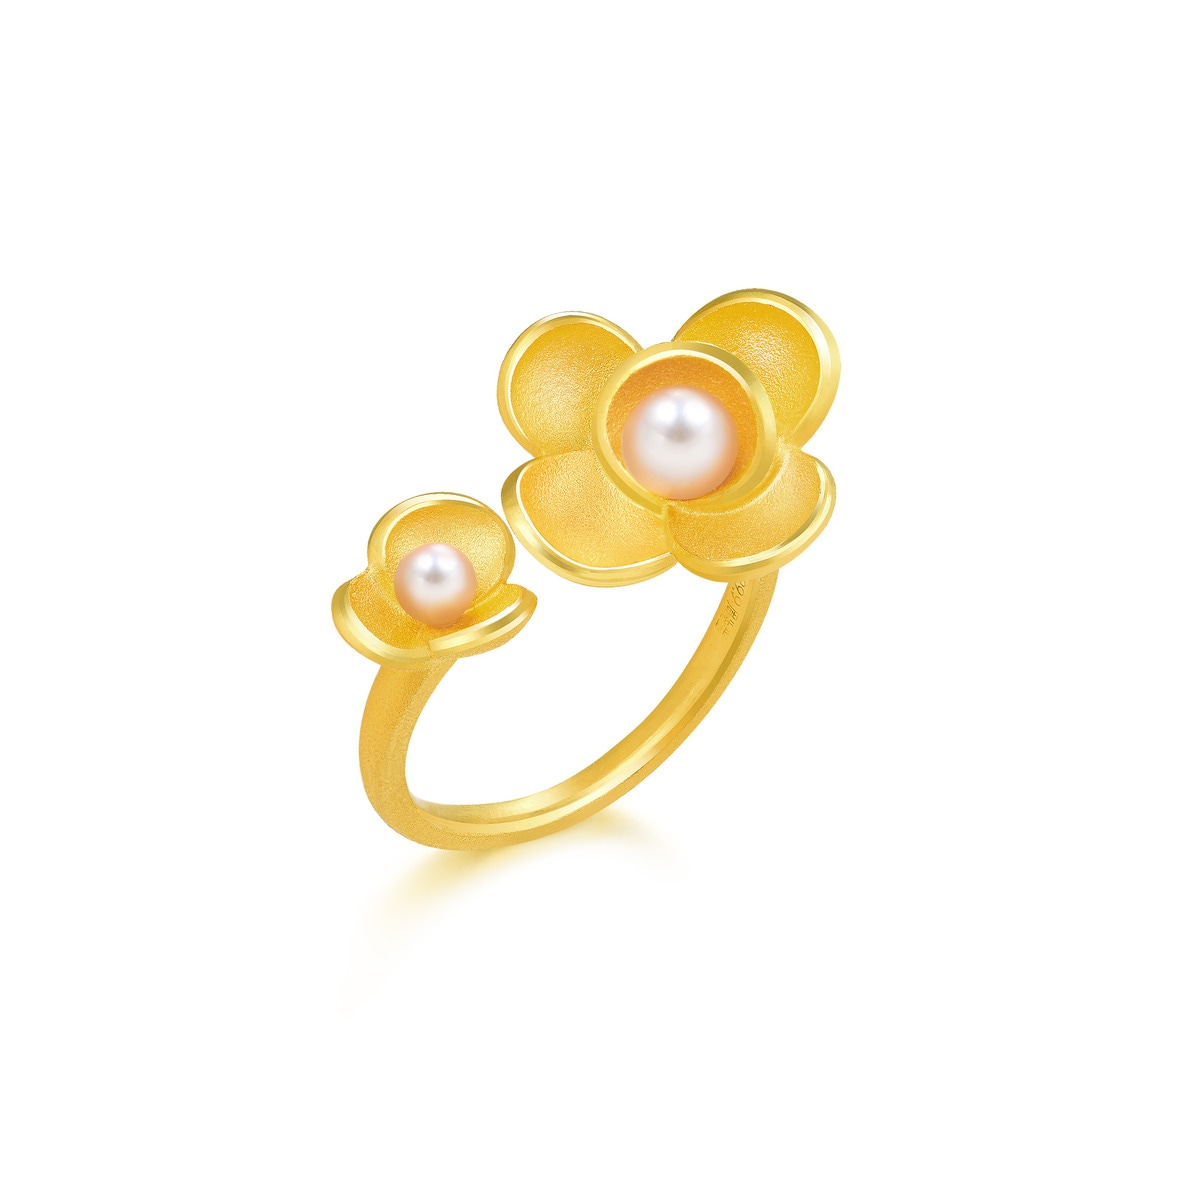 Chinese Wedding Collection 'Floral' 999.9 Gold Ring | Chow Sang Sang ...